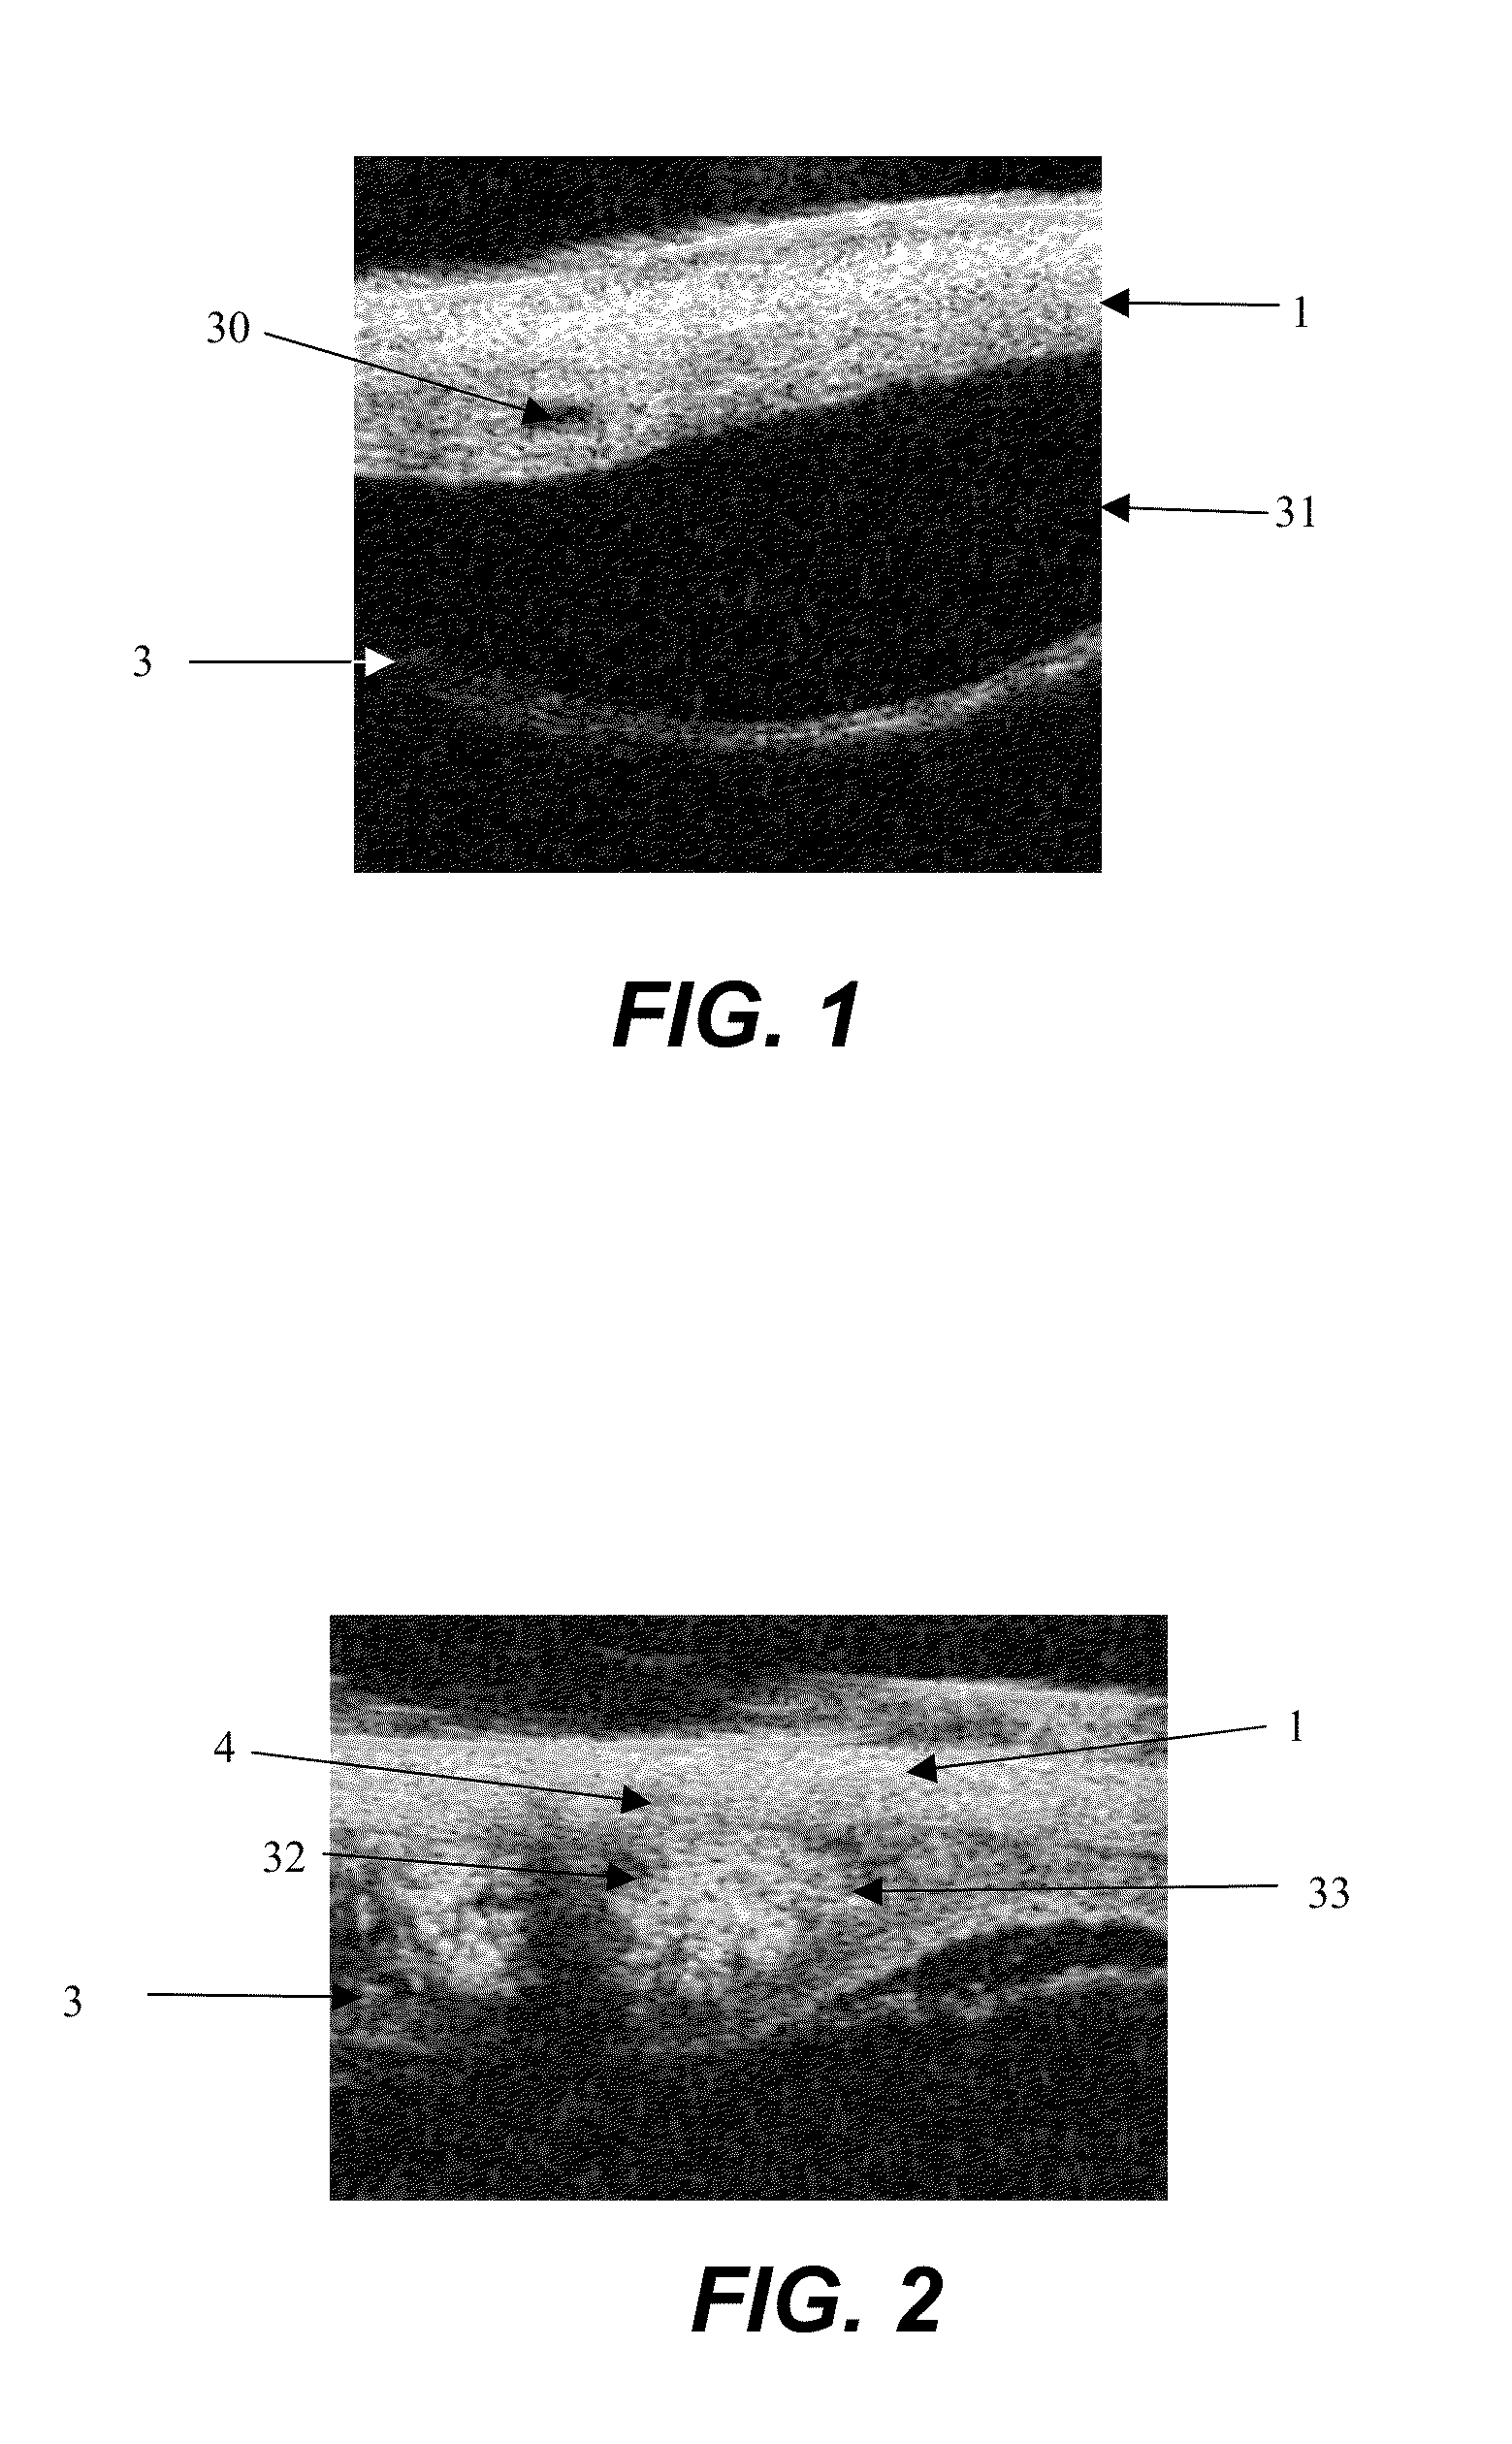 Apparatus and formulations for suprachoridal drug delivery